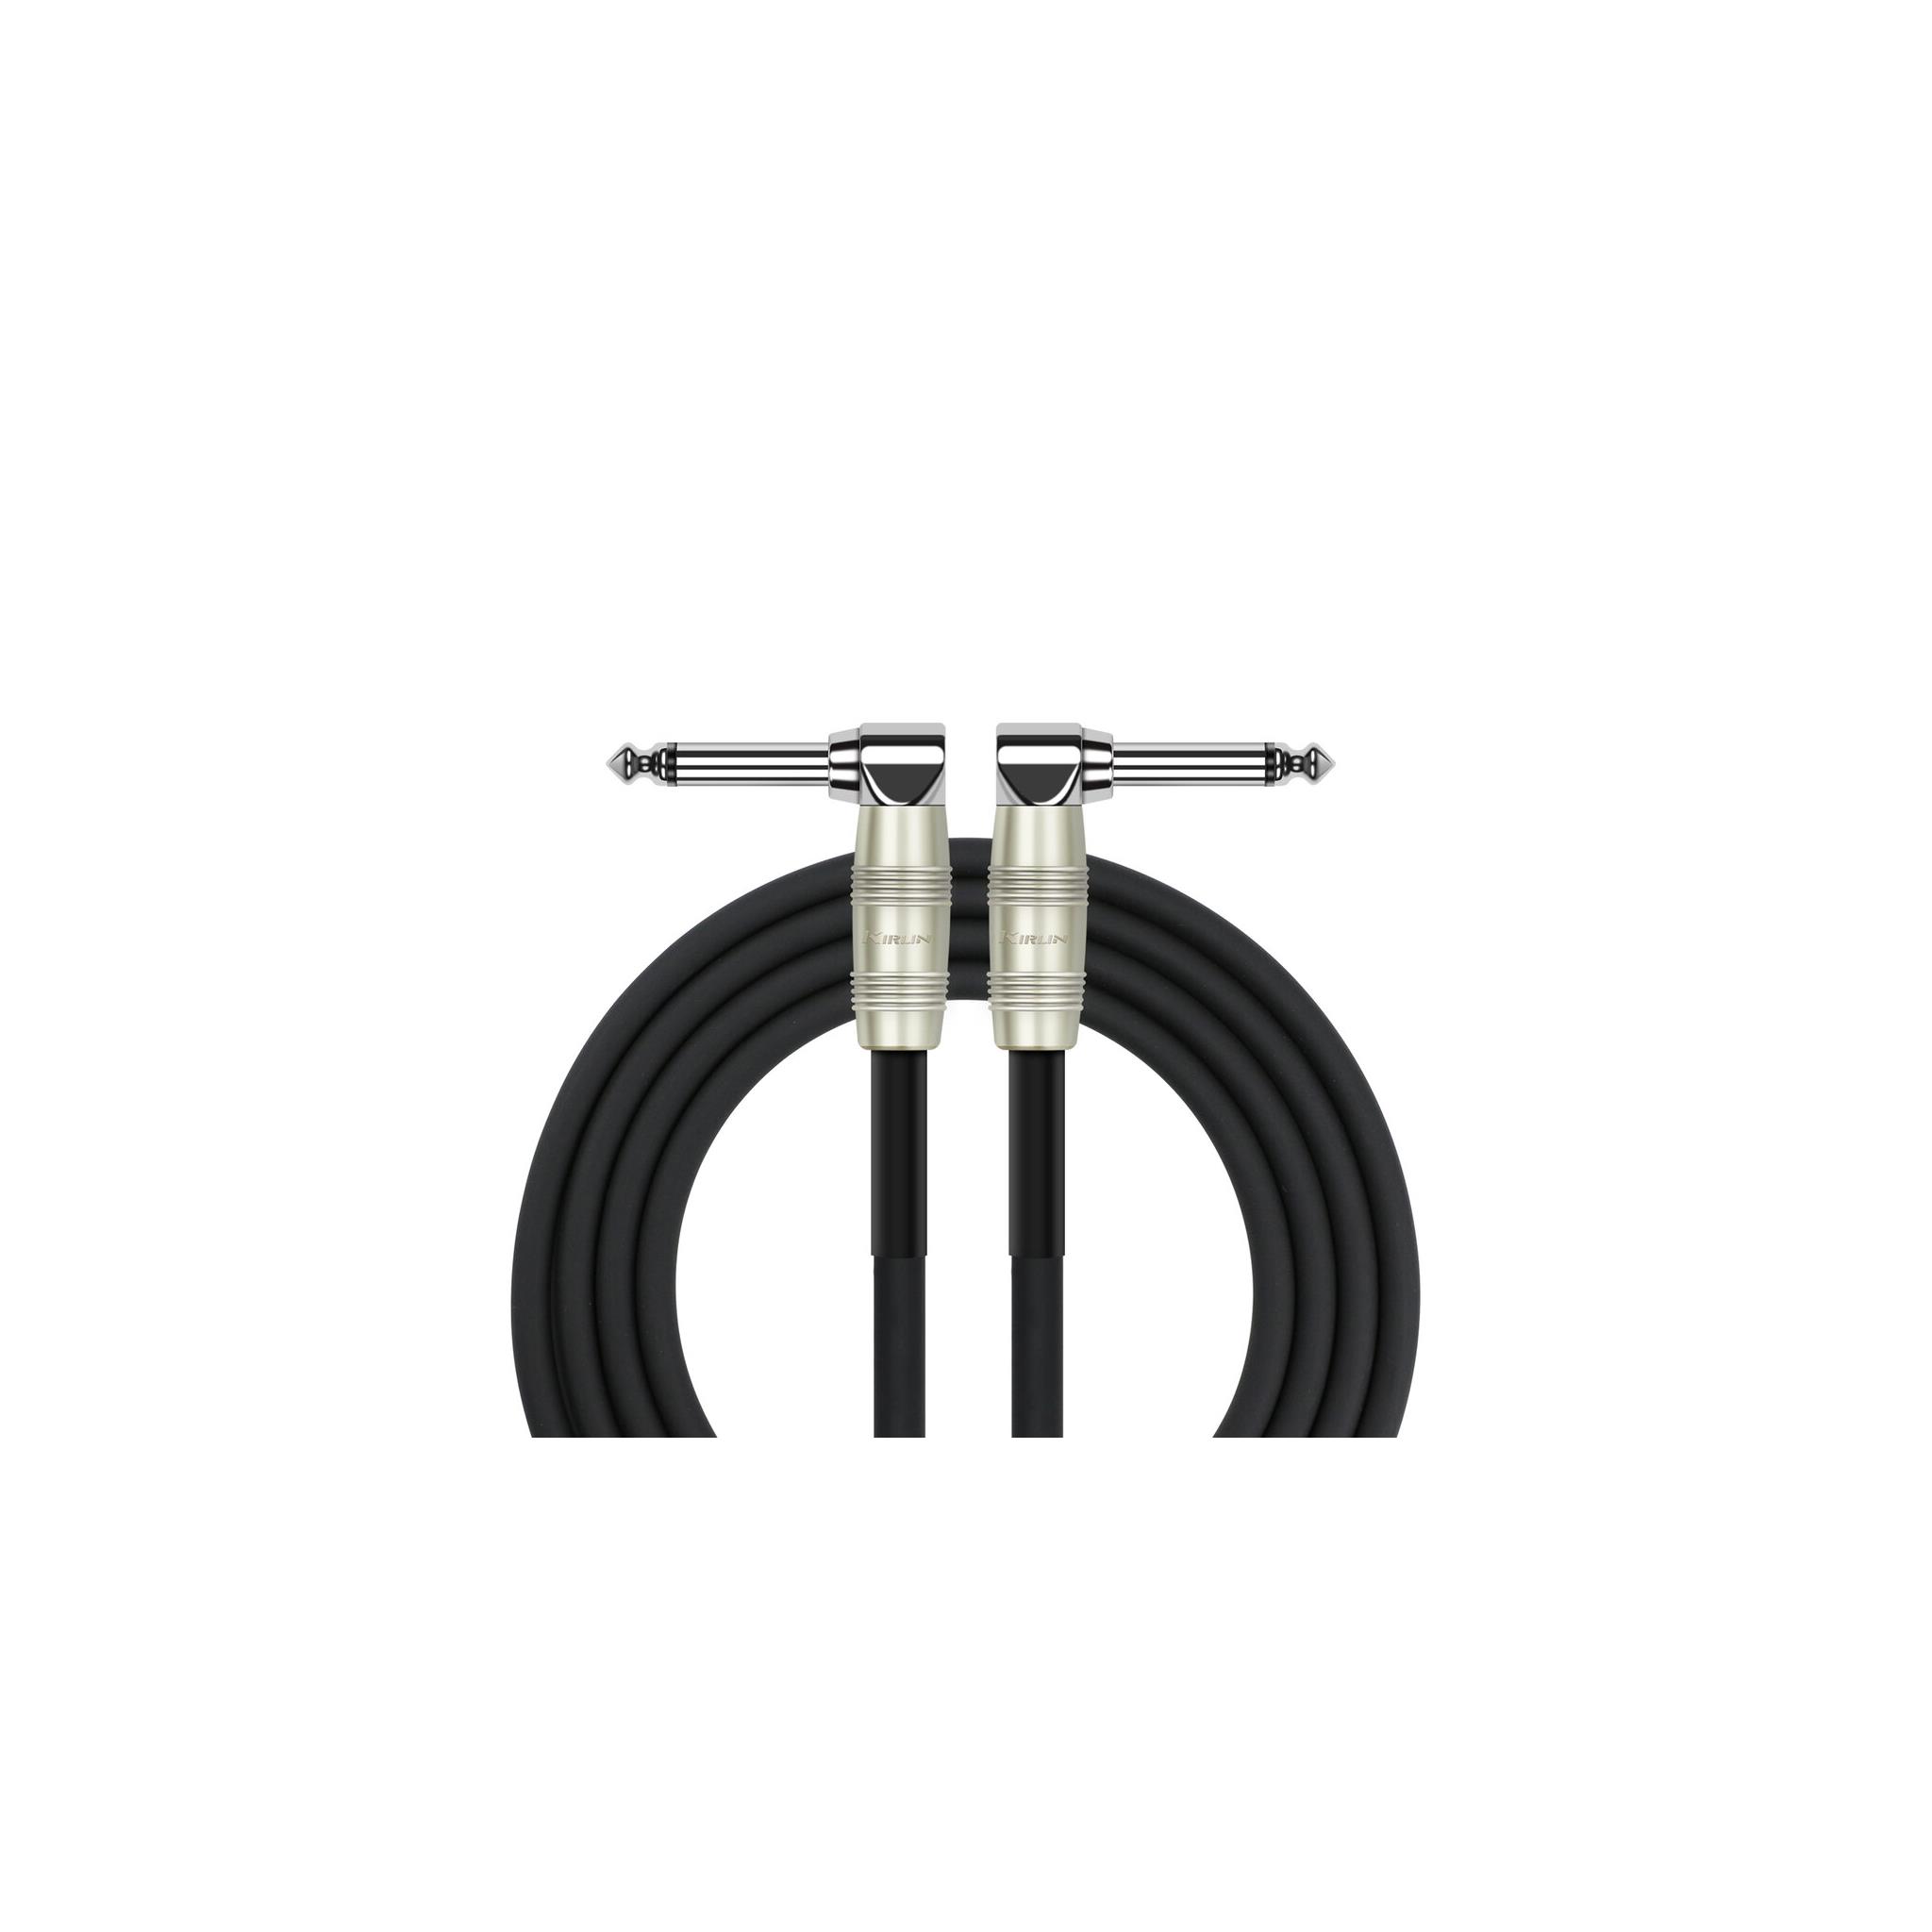 Kirlin 6' RA/RA Instrument Cable